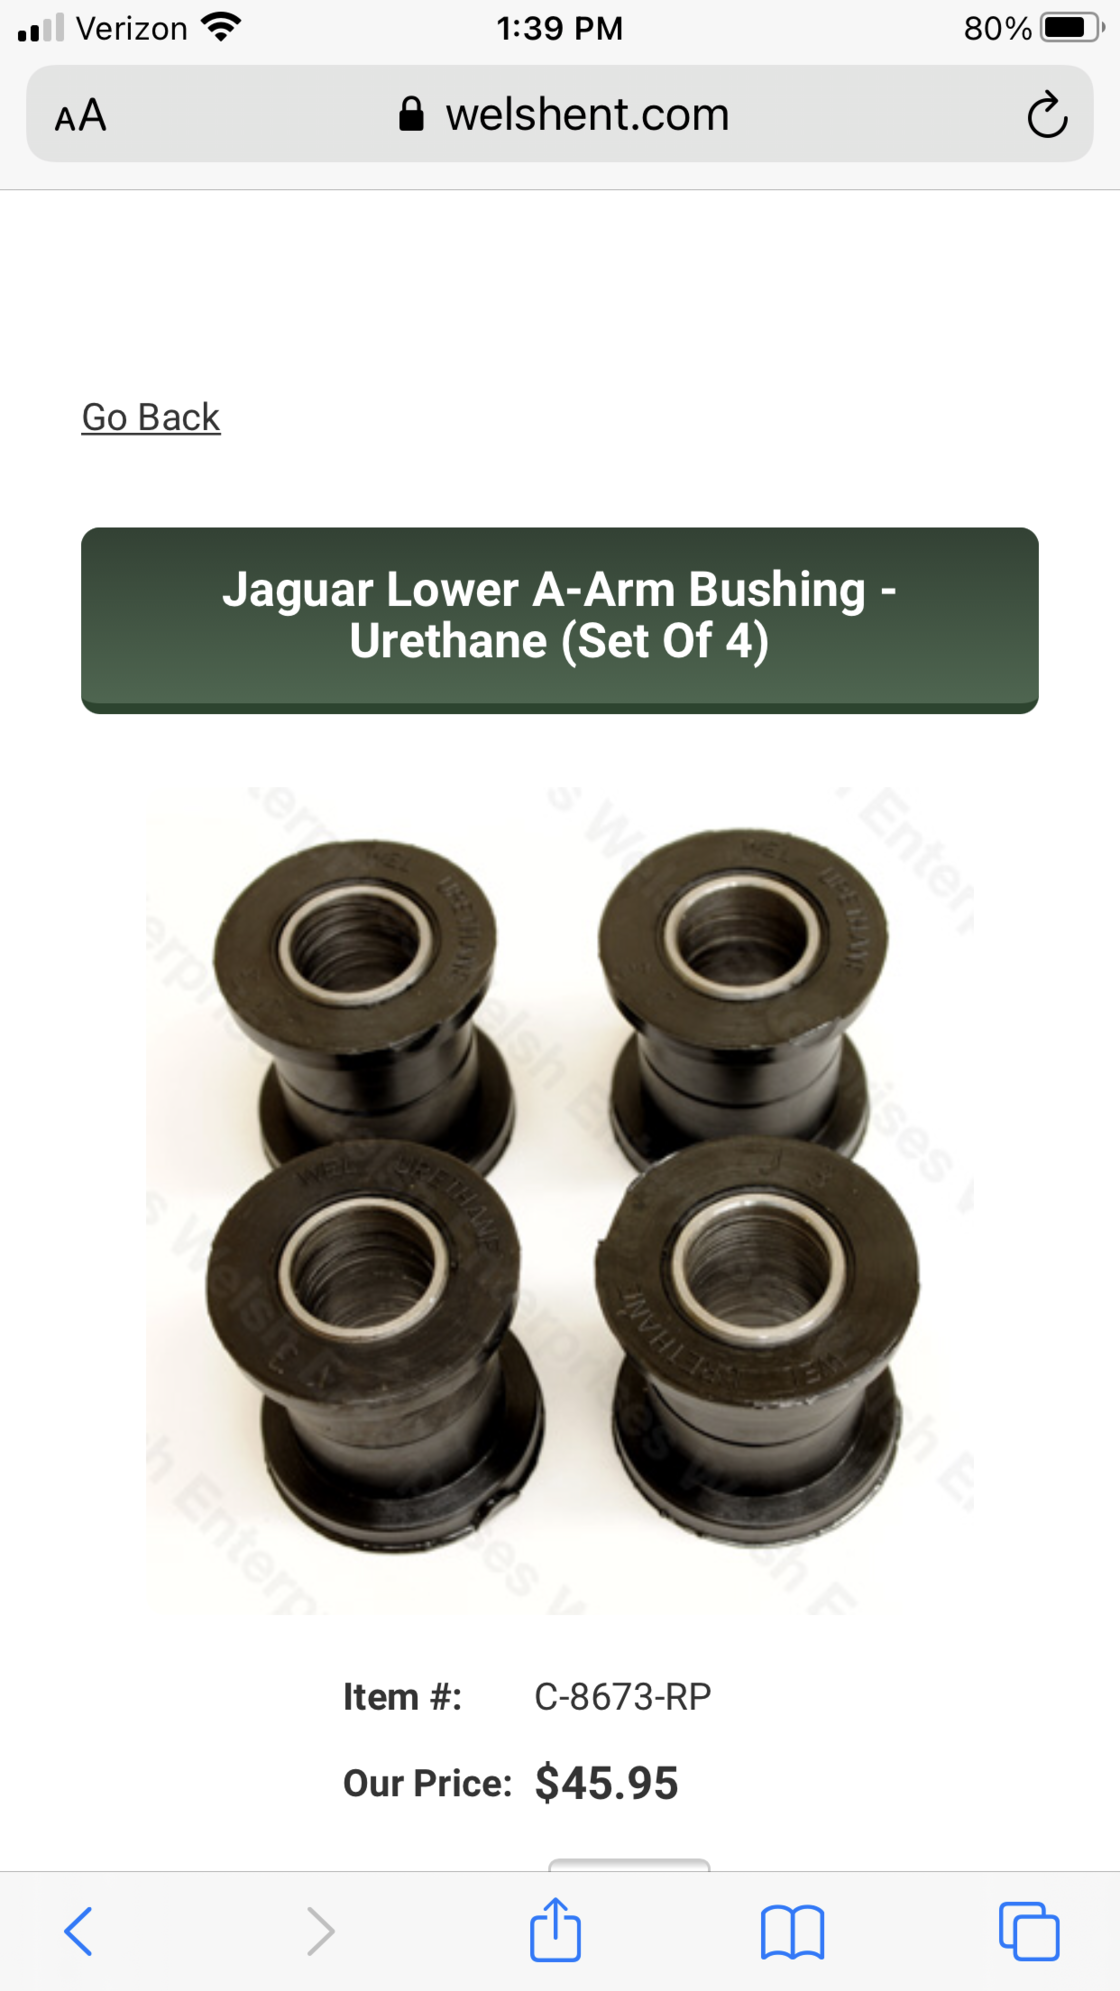 Steering/Suspension - Upper and lower ball joints and bushings xj6 - 115.00 - New - 1978 to 1984 Jaguar XJ6 - Canonsburg, PA 15317, United States